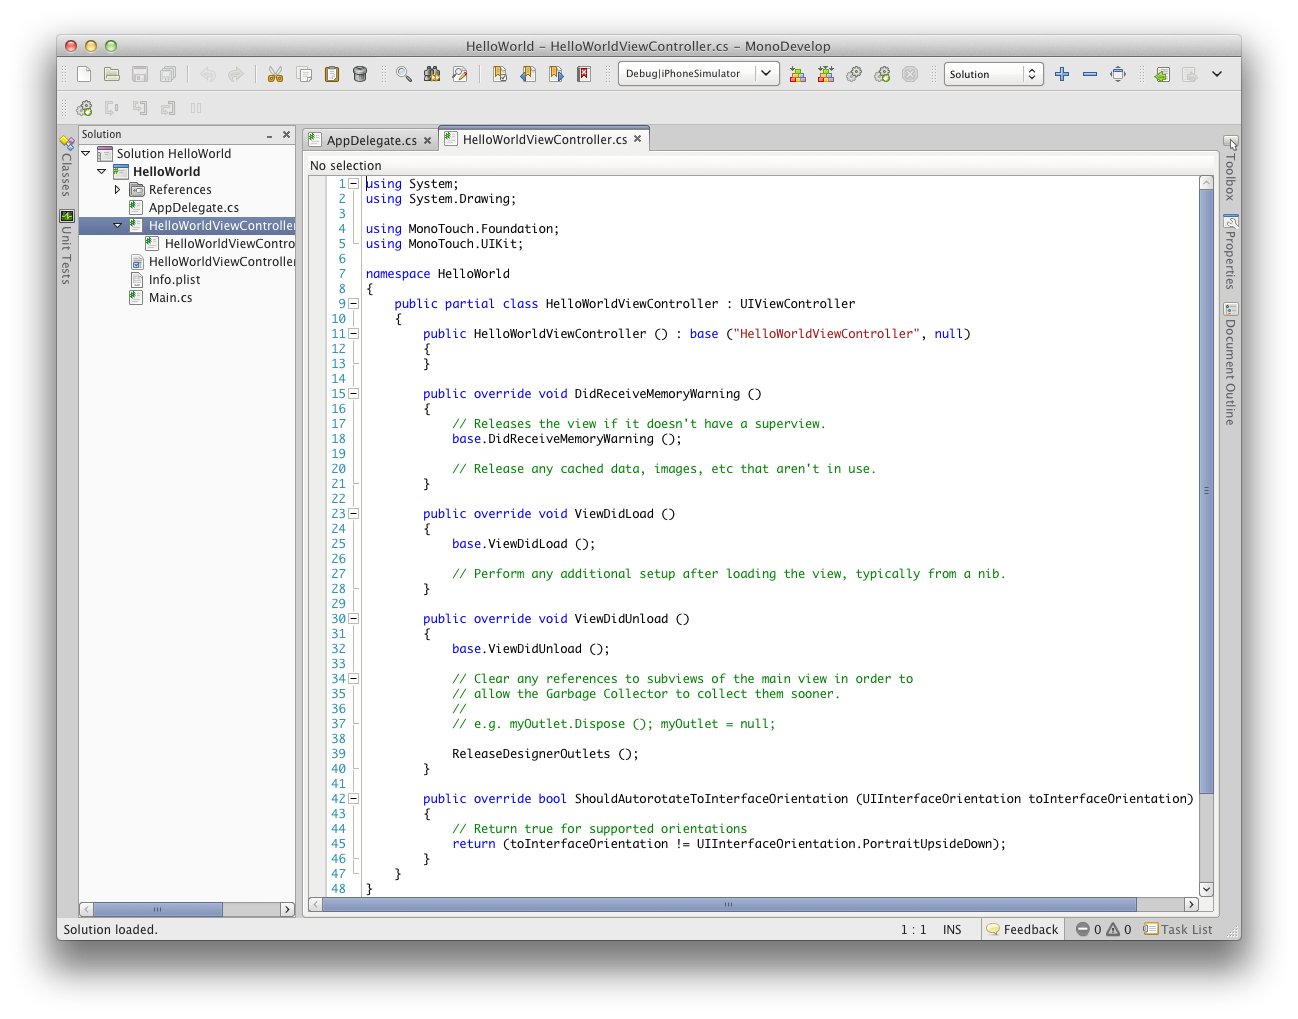 New project code in MonoDevelop